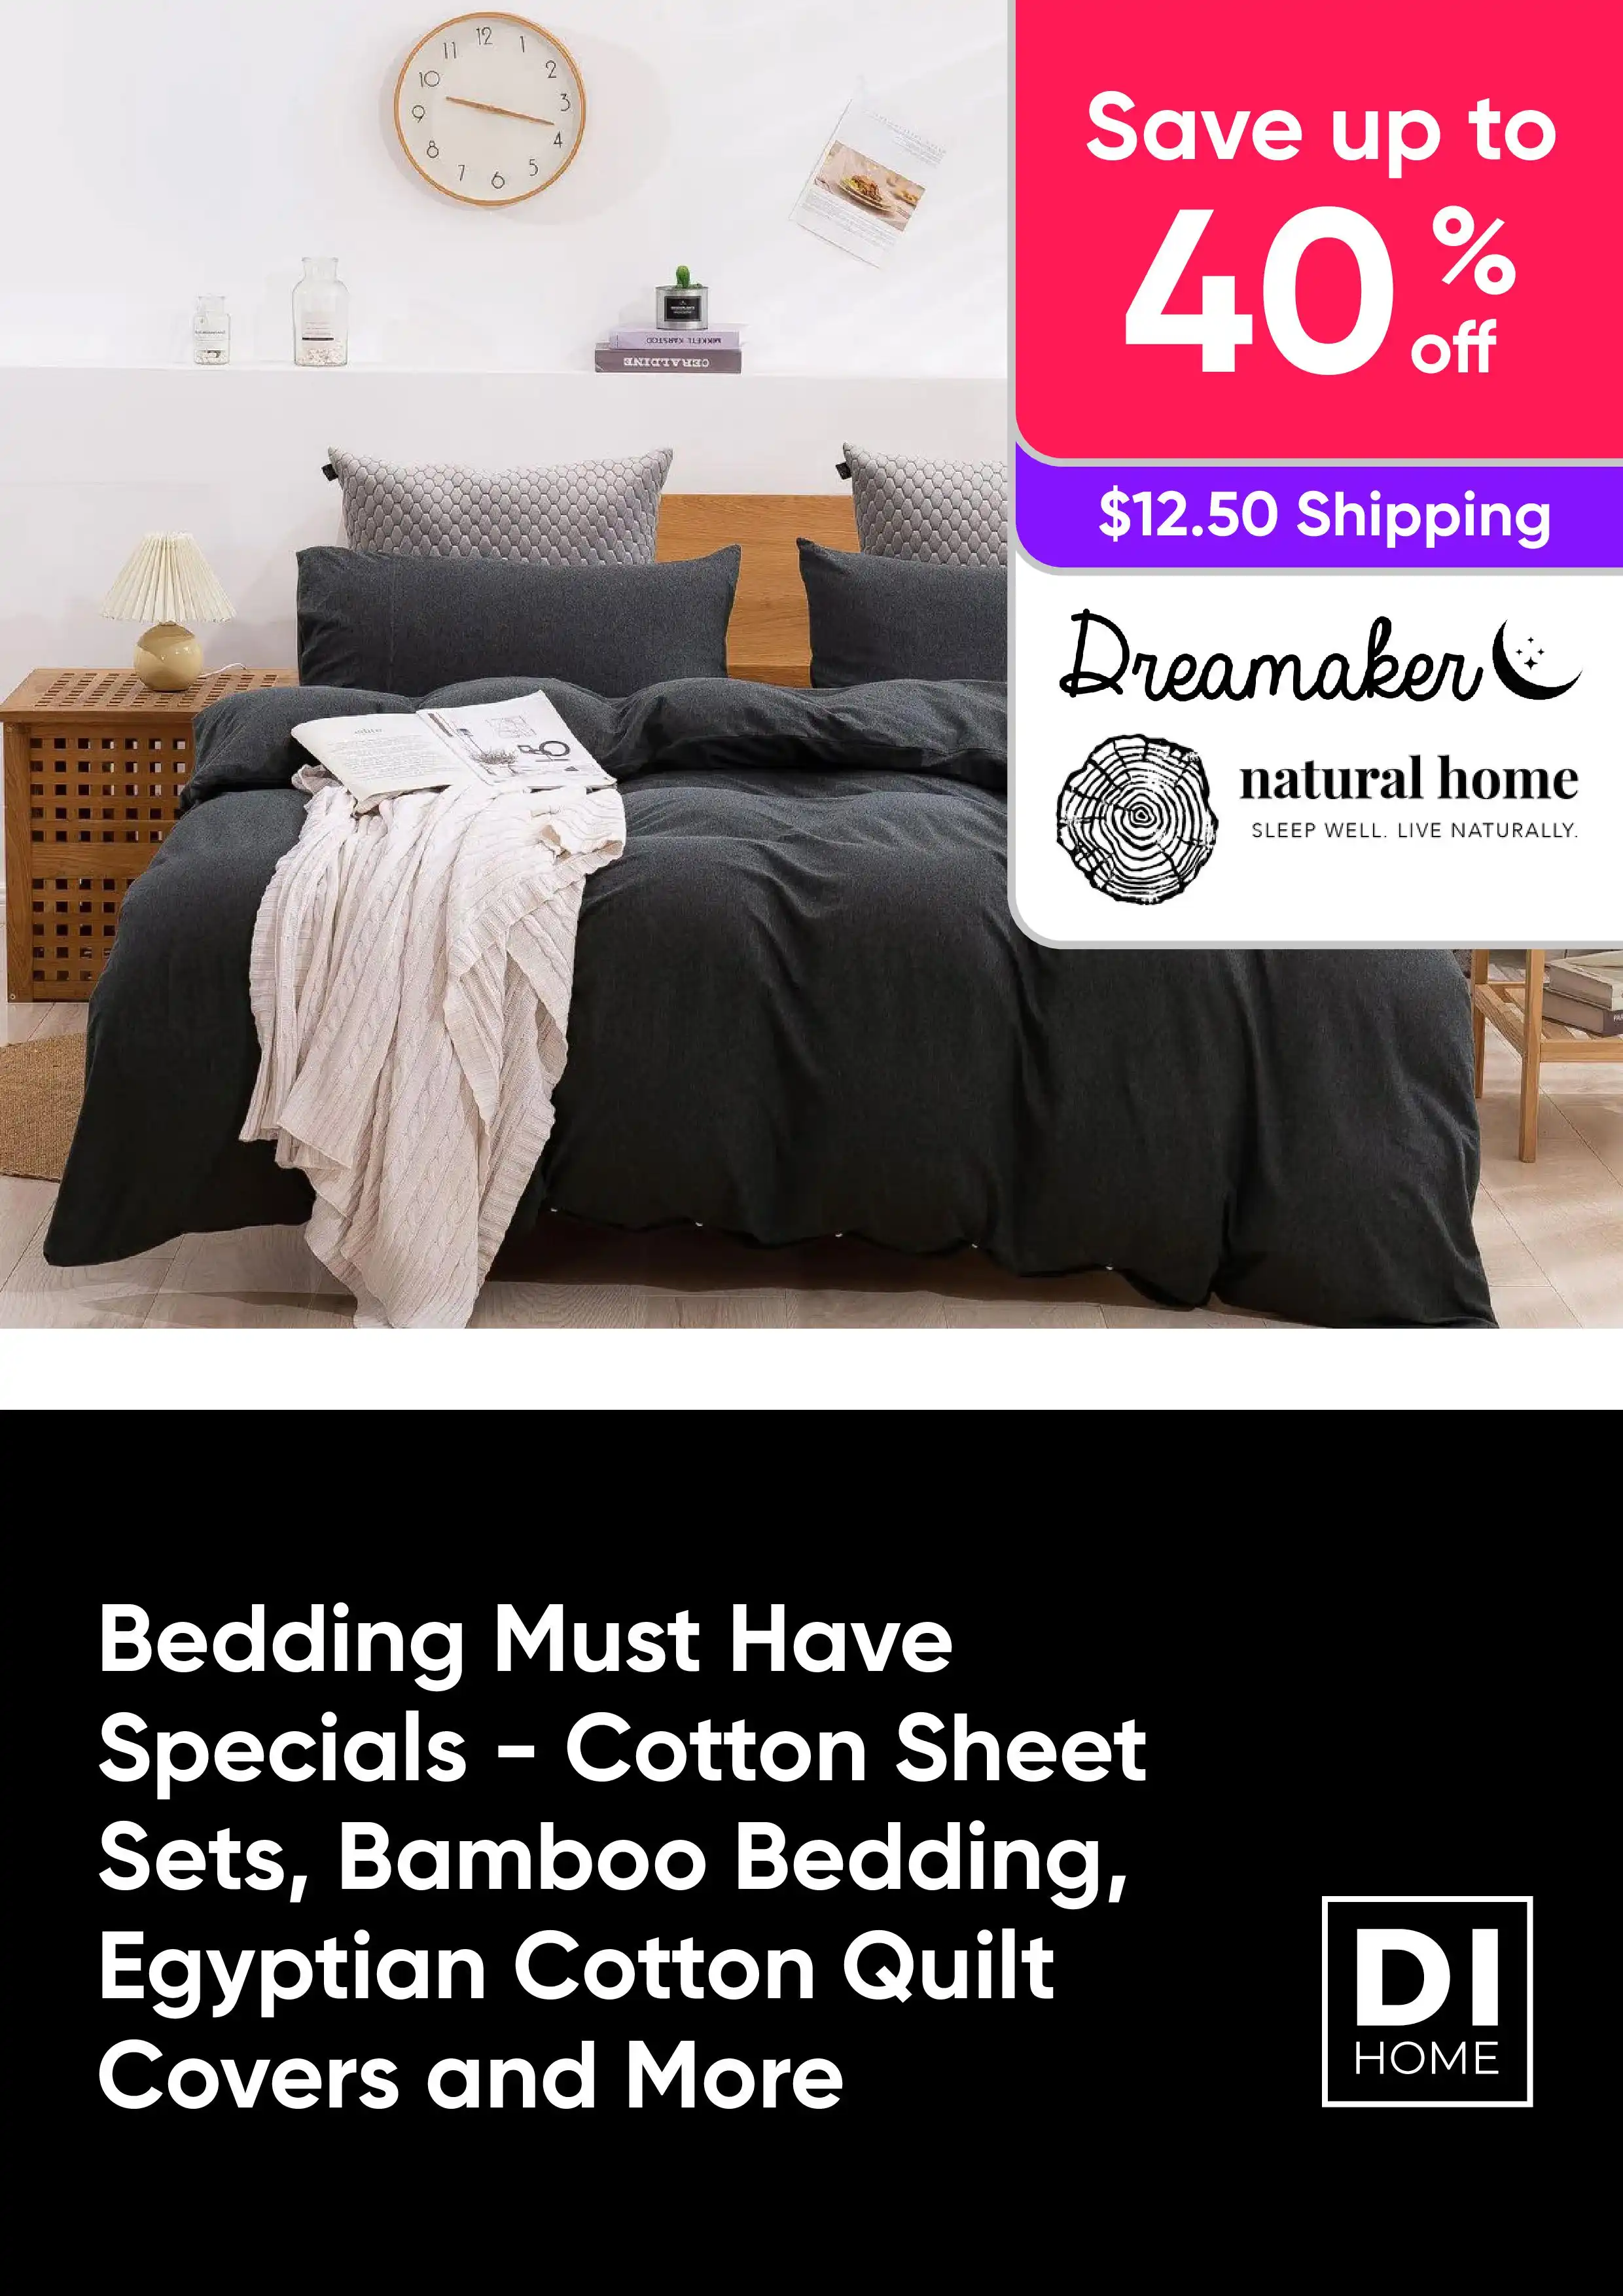 Bedding Must Have Specials - Cotton Sheet Sets, Bamboo Bedding, Egyptian Cotton Quilt Covers and More - Save up to 40% off